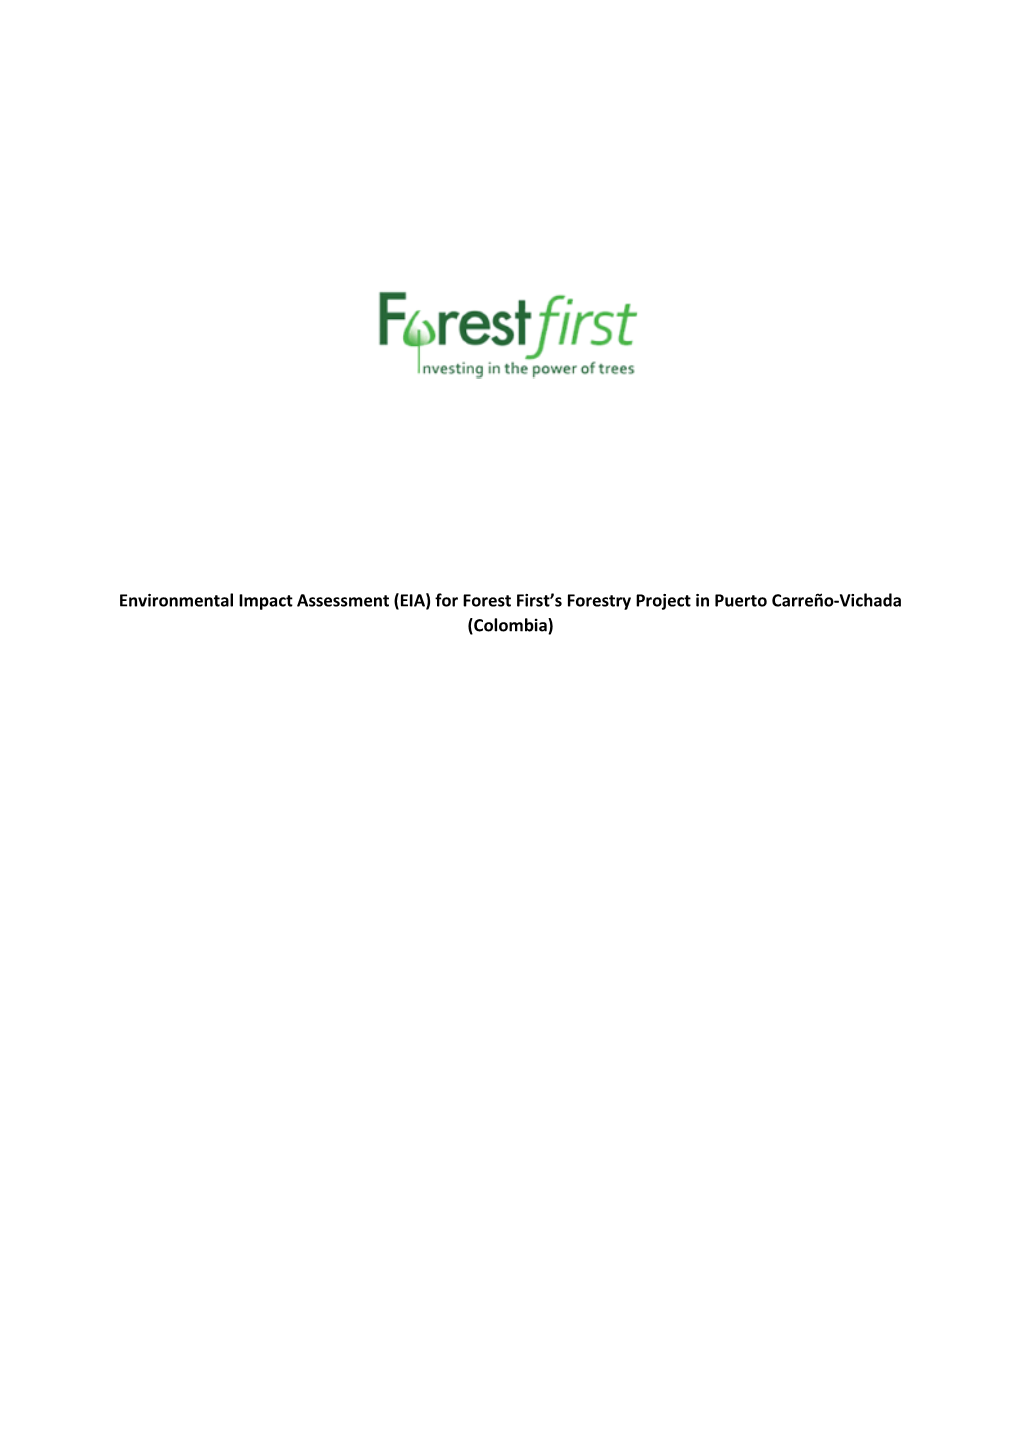 (EIA) for Forest First's Forestry Project in Puerto Carreño-Vichada